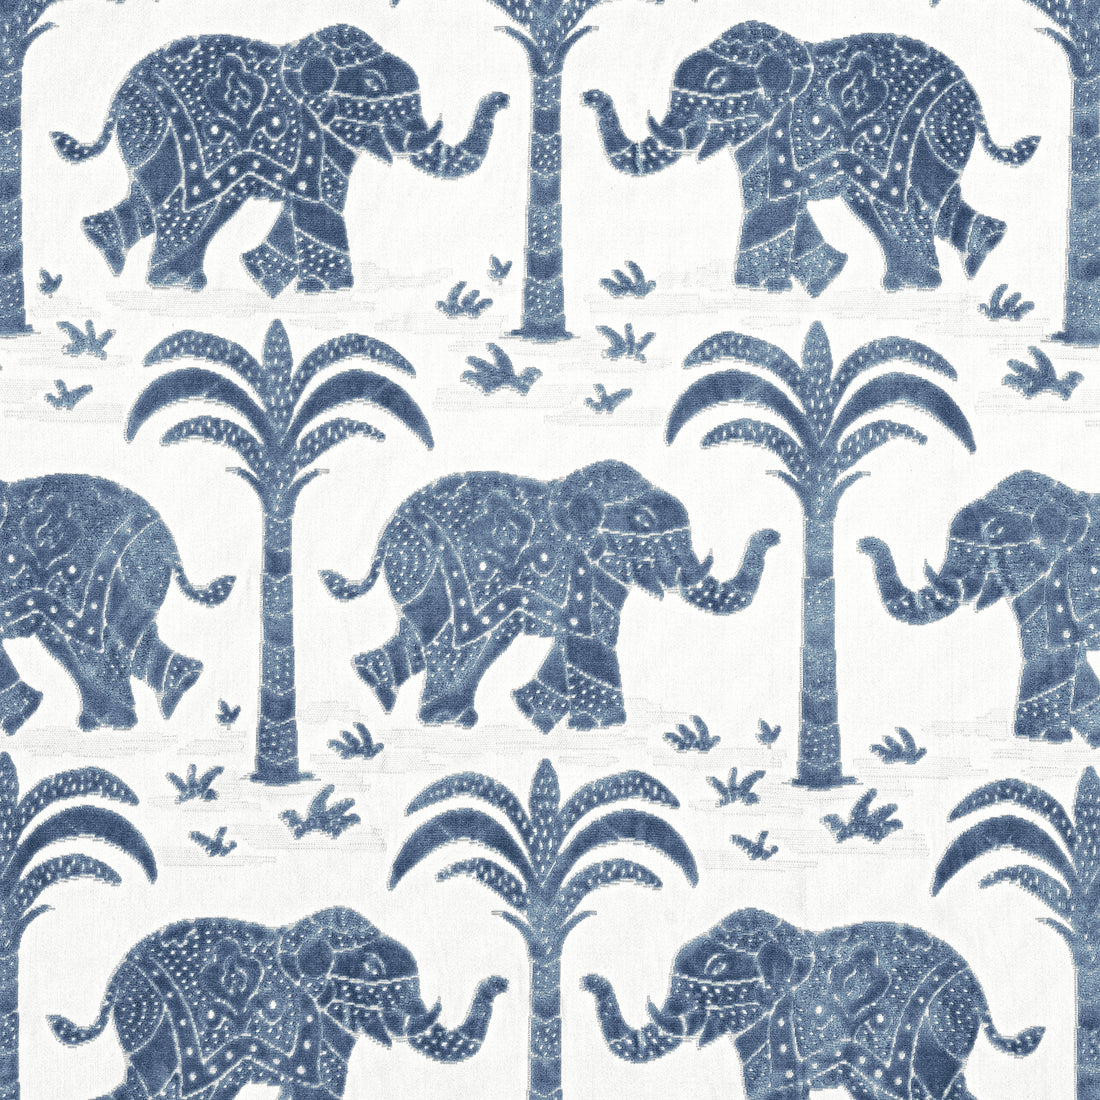 Elephant Velvet fabric in navy color - pattern number W716200 - by Thibaut in the Kismet collection